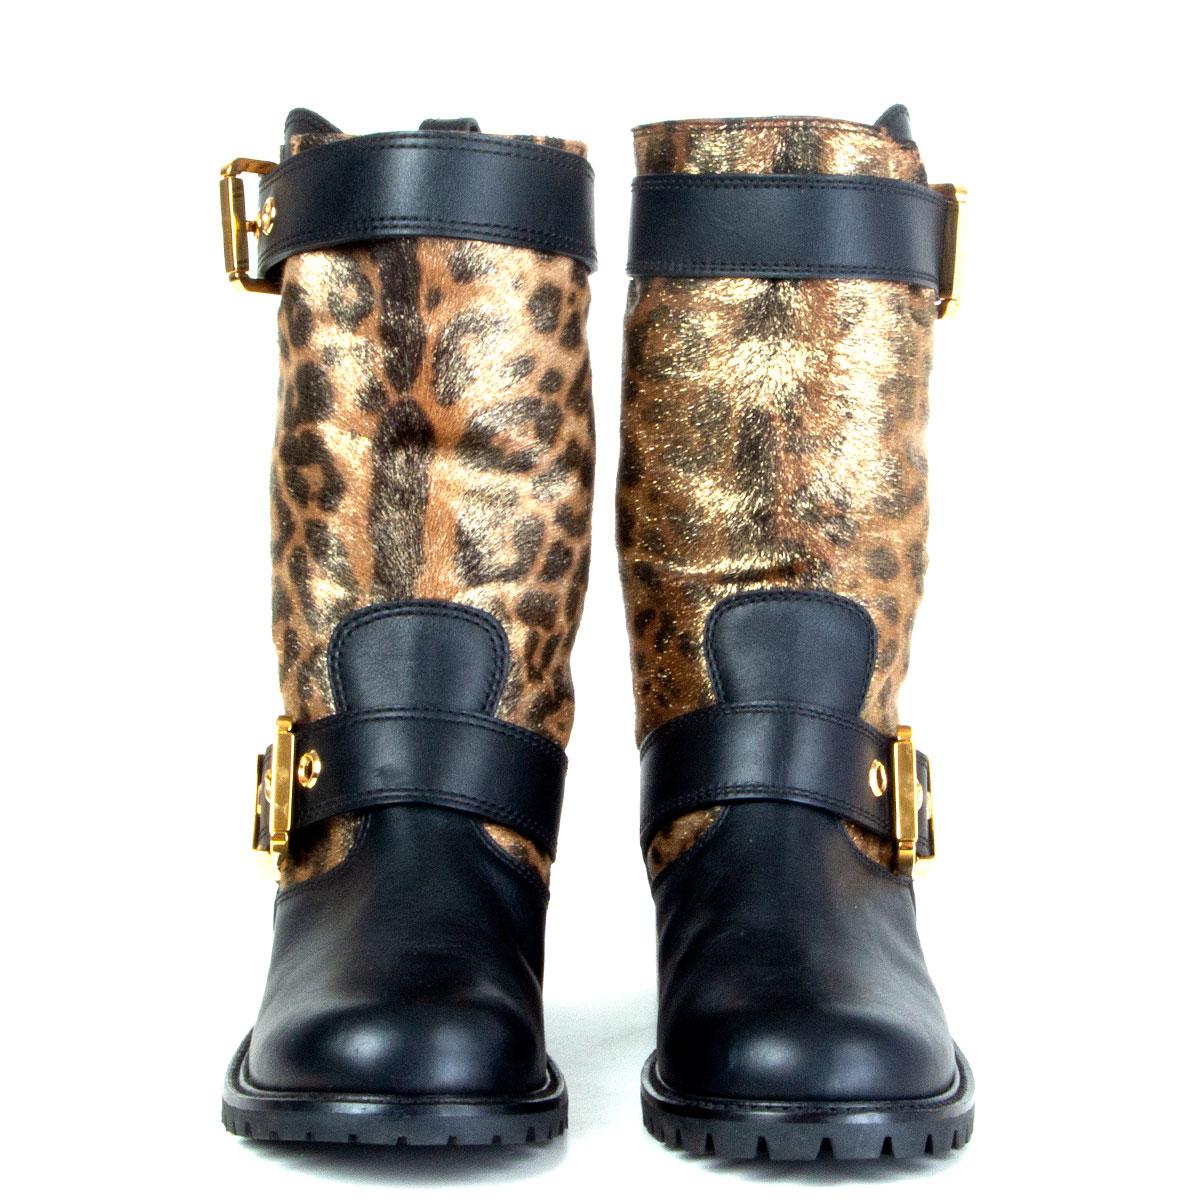 authentic Giuseppe Zanotti biker boots in gold-tone metallic leopard-print calf-hair and black calfskin. Two gold-tone metal buckles on the side. Black rubber sole. Have been worn and are in excellent condition. 

Imprinted Size 37
Shoe Size